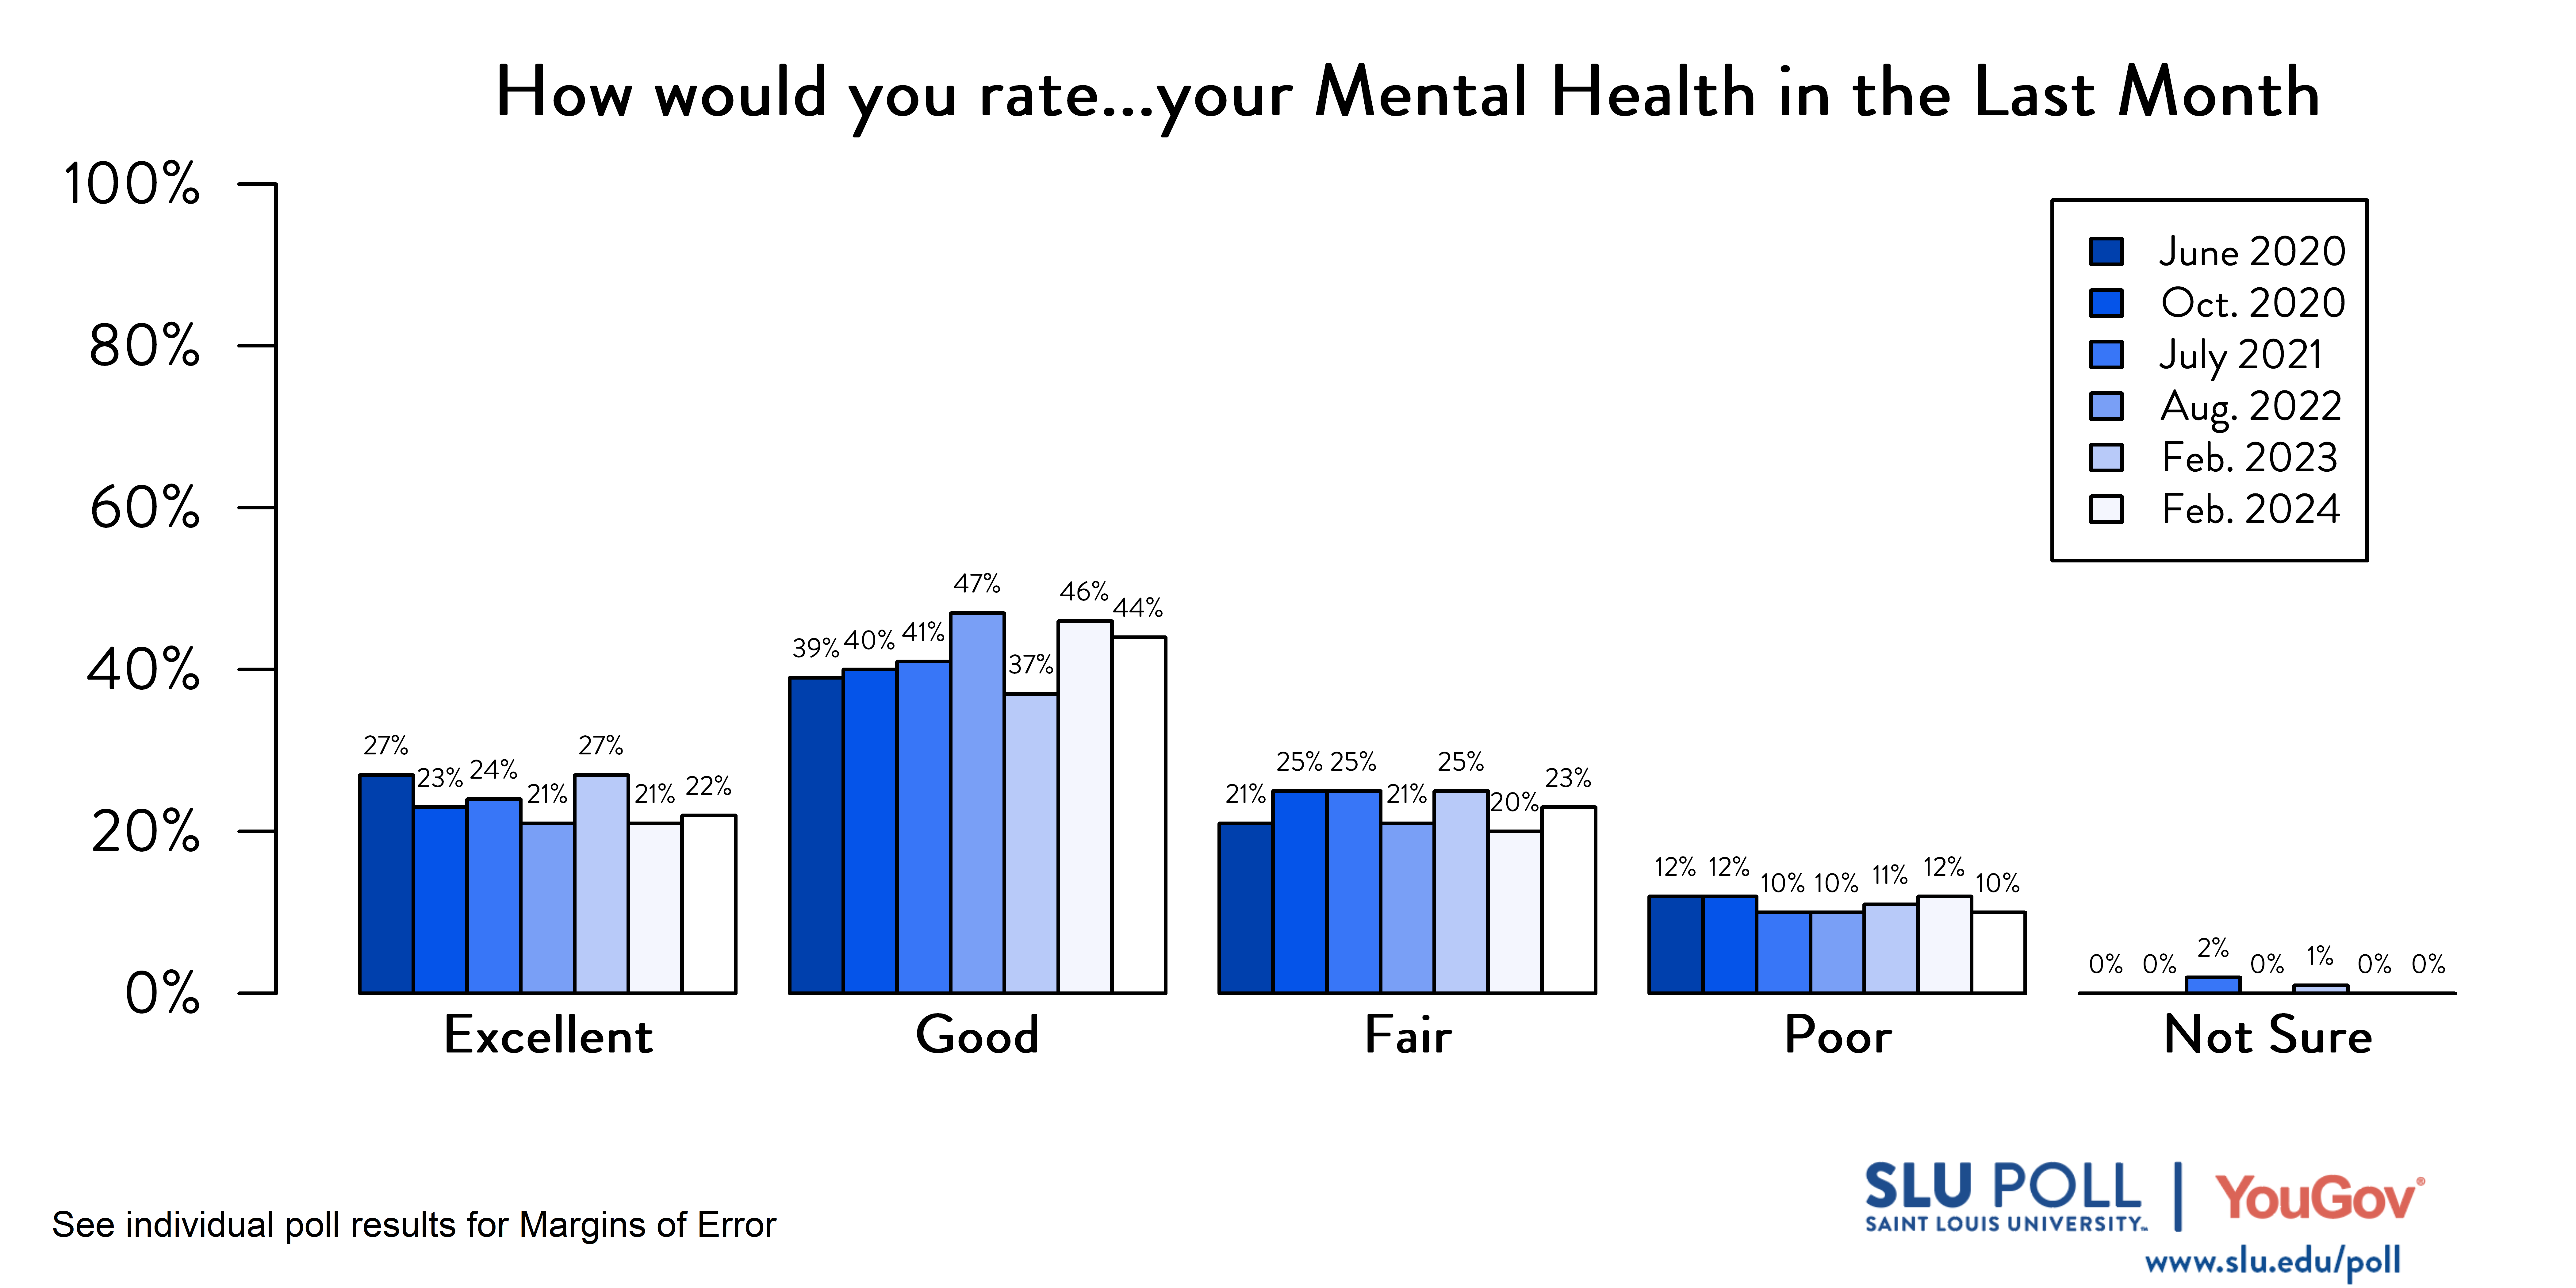 Likely voters' responses to 'How would you rate the condition of the following…Your mental health in the last month?'. June 2020 Voter Responses 27% Excellent, 39% Good, 21% Fair, 12% Poor, and 0% Not sure. October 2020 Voter Responses: 23% Excellent, 40% Good, 25% Fair, 12% Poor, and 0% Not sure. July 2021 Voter Responses: 24% Excellent, 41% Good, 25% Fair, 10% Poor, and 2% Not sure. August 2022 Voter Responses: 21% Excellent, 47% Good, 21% Fair, 10% Poor, and 0% Not sure. February 2023 Voter Responses: 27% Excellent, 37% Good, 25% Fair, 11% Poor, and 1% Not sure. February 2024 Voter Responses: 22% Excellent, 44% Good, 23% Fair, 10% Poor, and 0% Not sure.